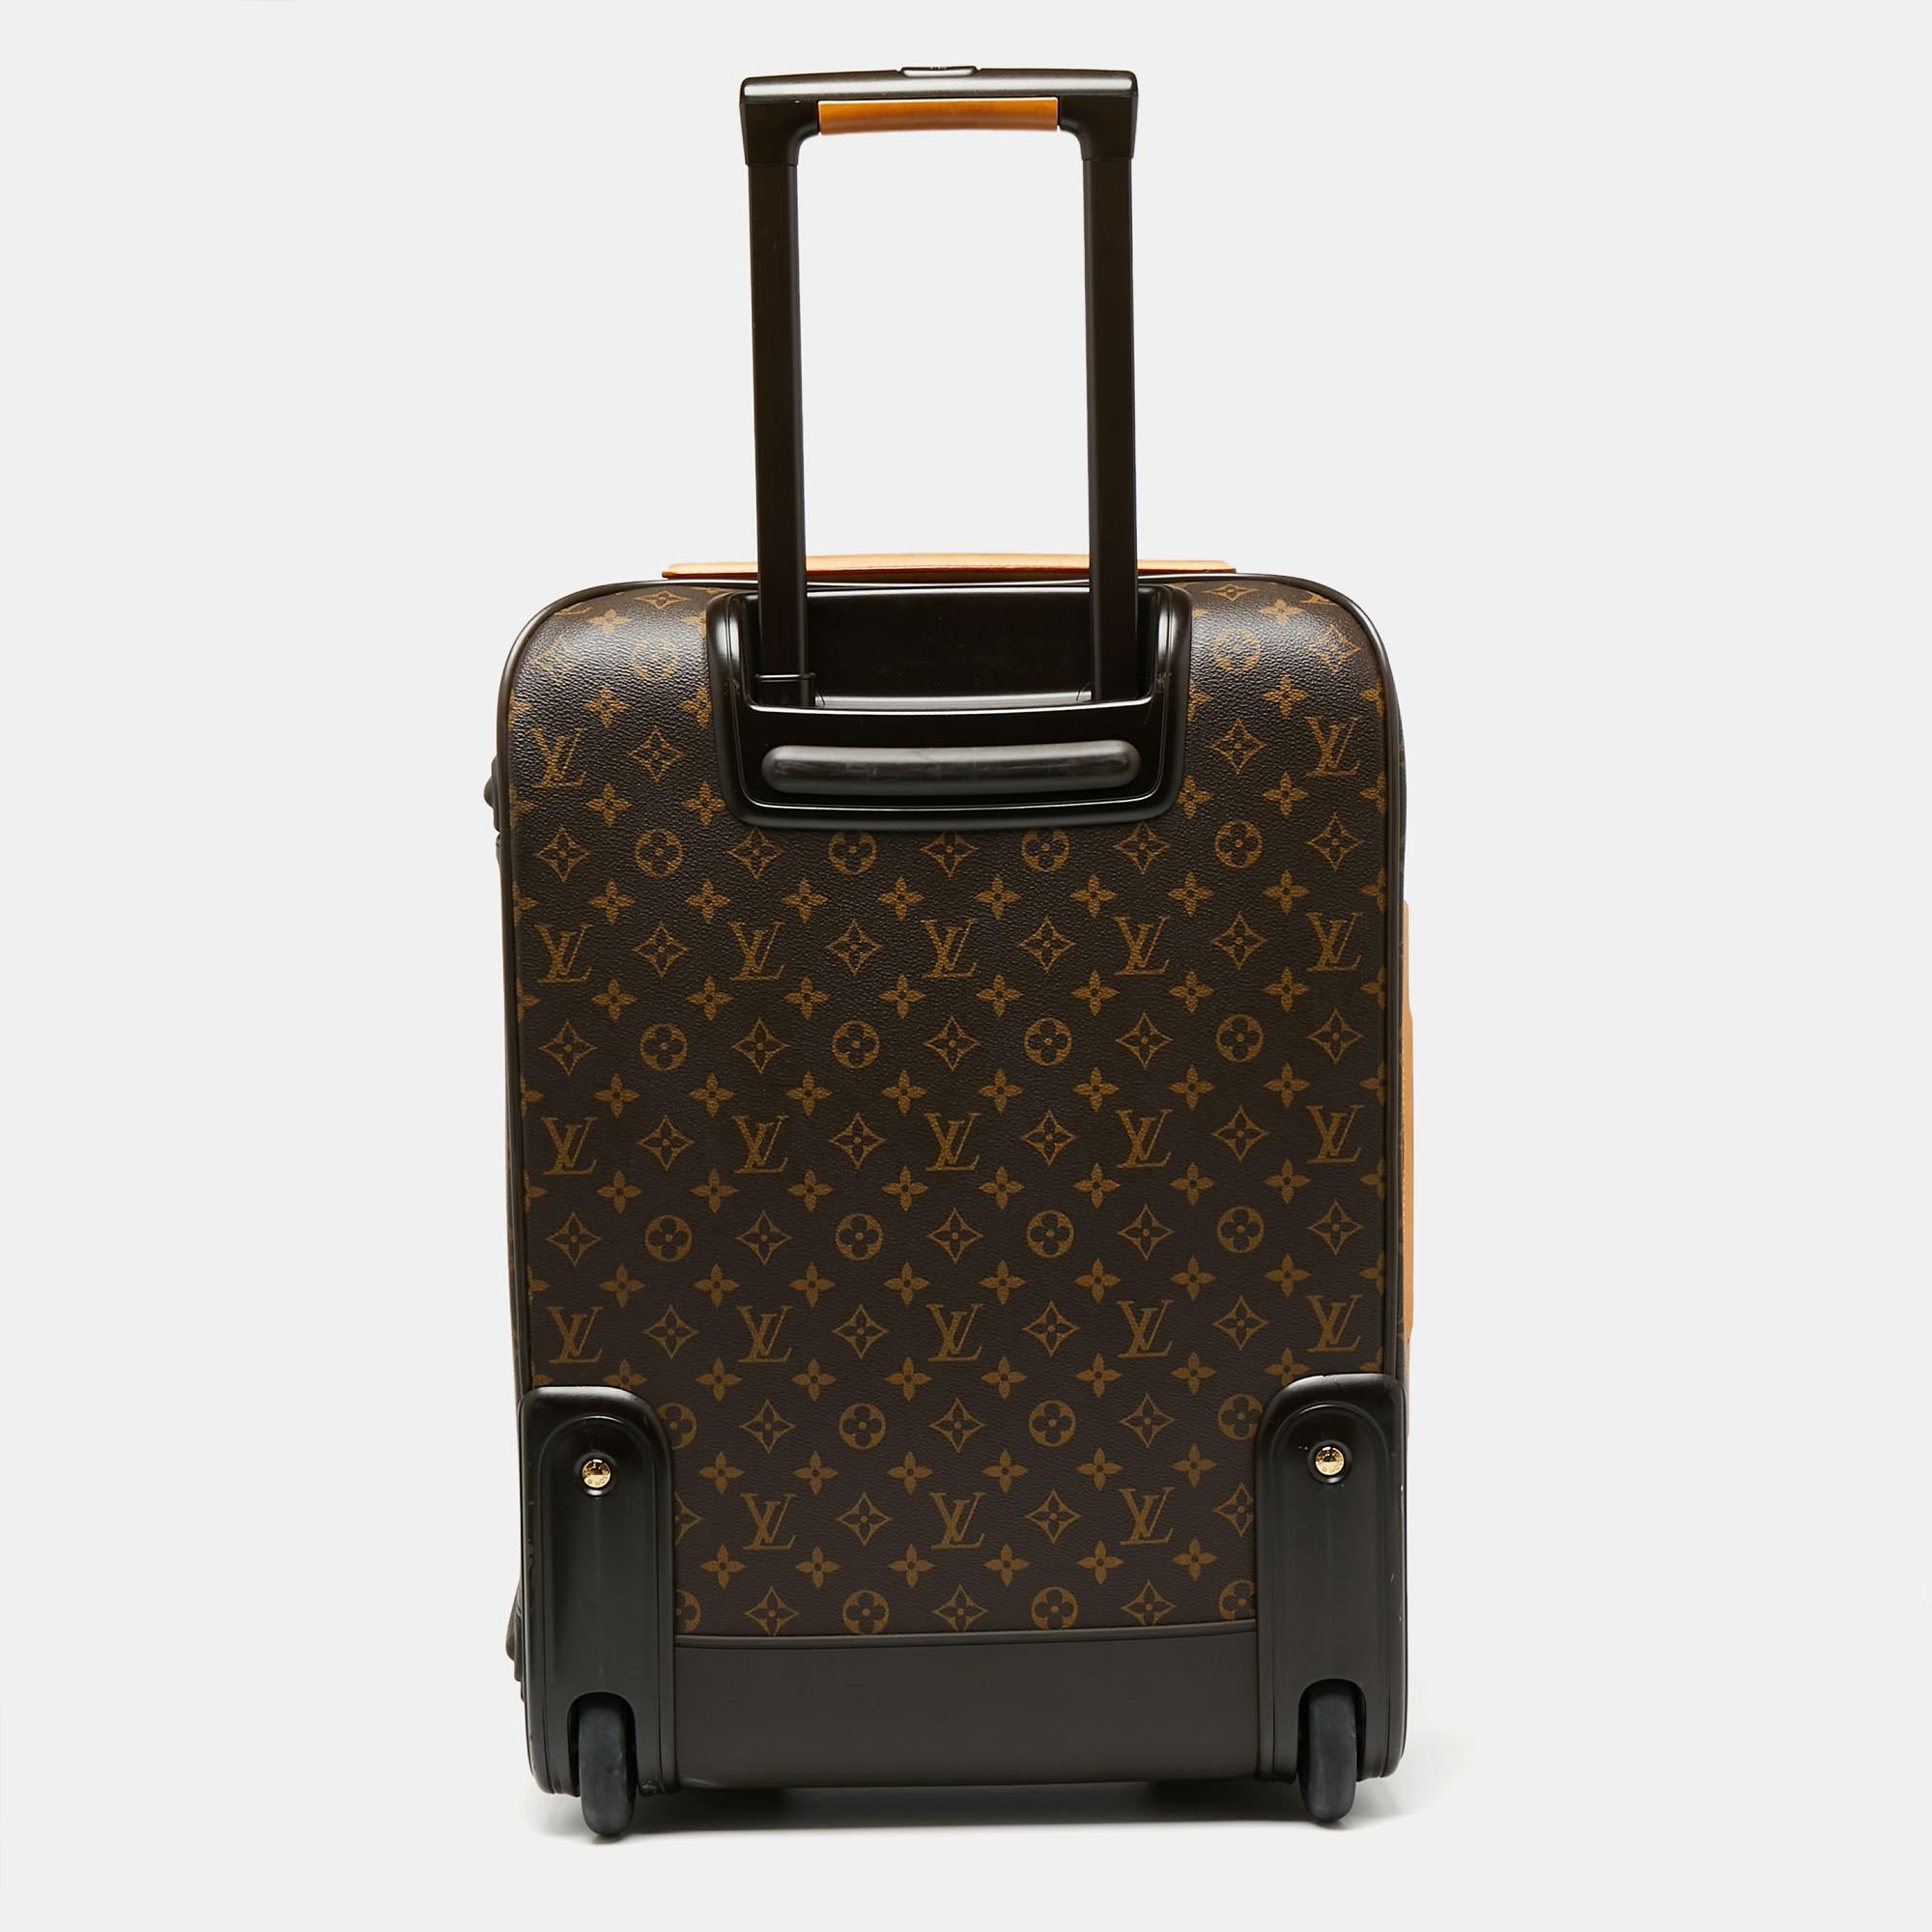 Say hello to your new traveling partner from Louis Vuitton. This Pegase Legere 55 luggage bag is a practical investment you must make. Crafted meticulously using Monogram canvas, this bag features gold-tone fittings, a capacious nylon-lined